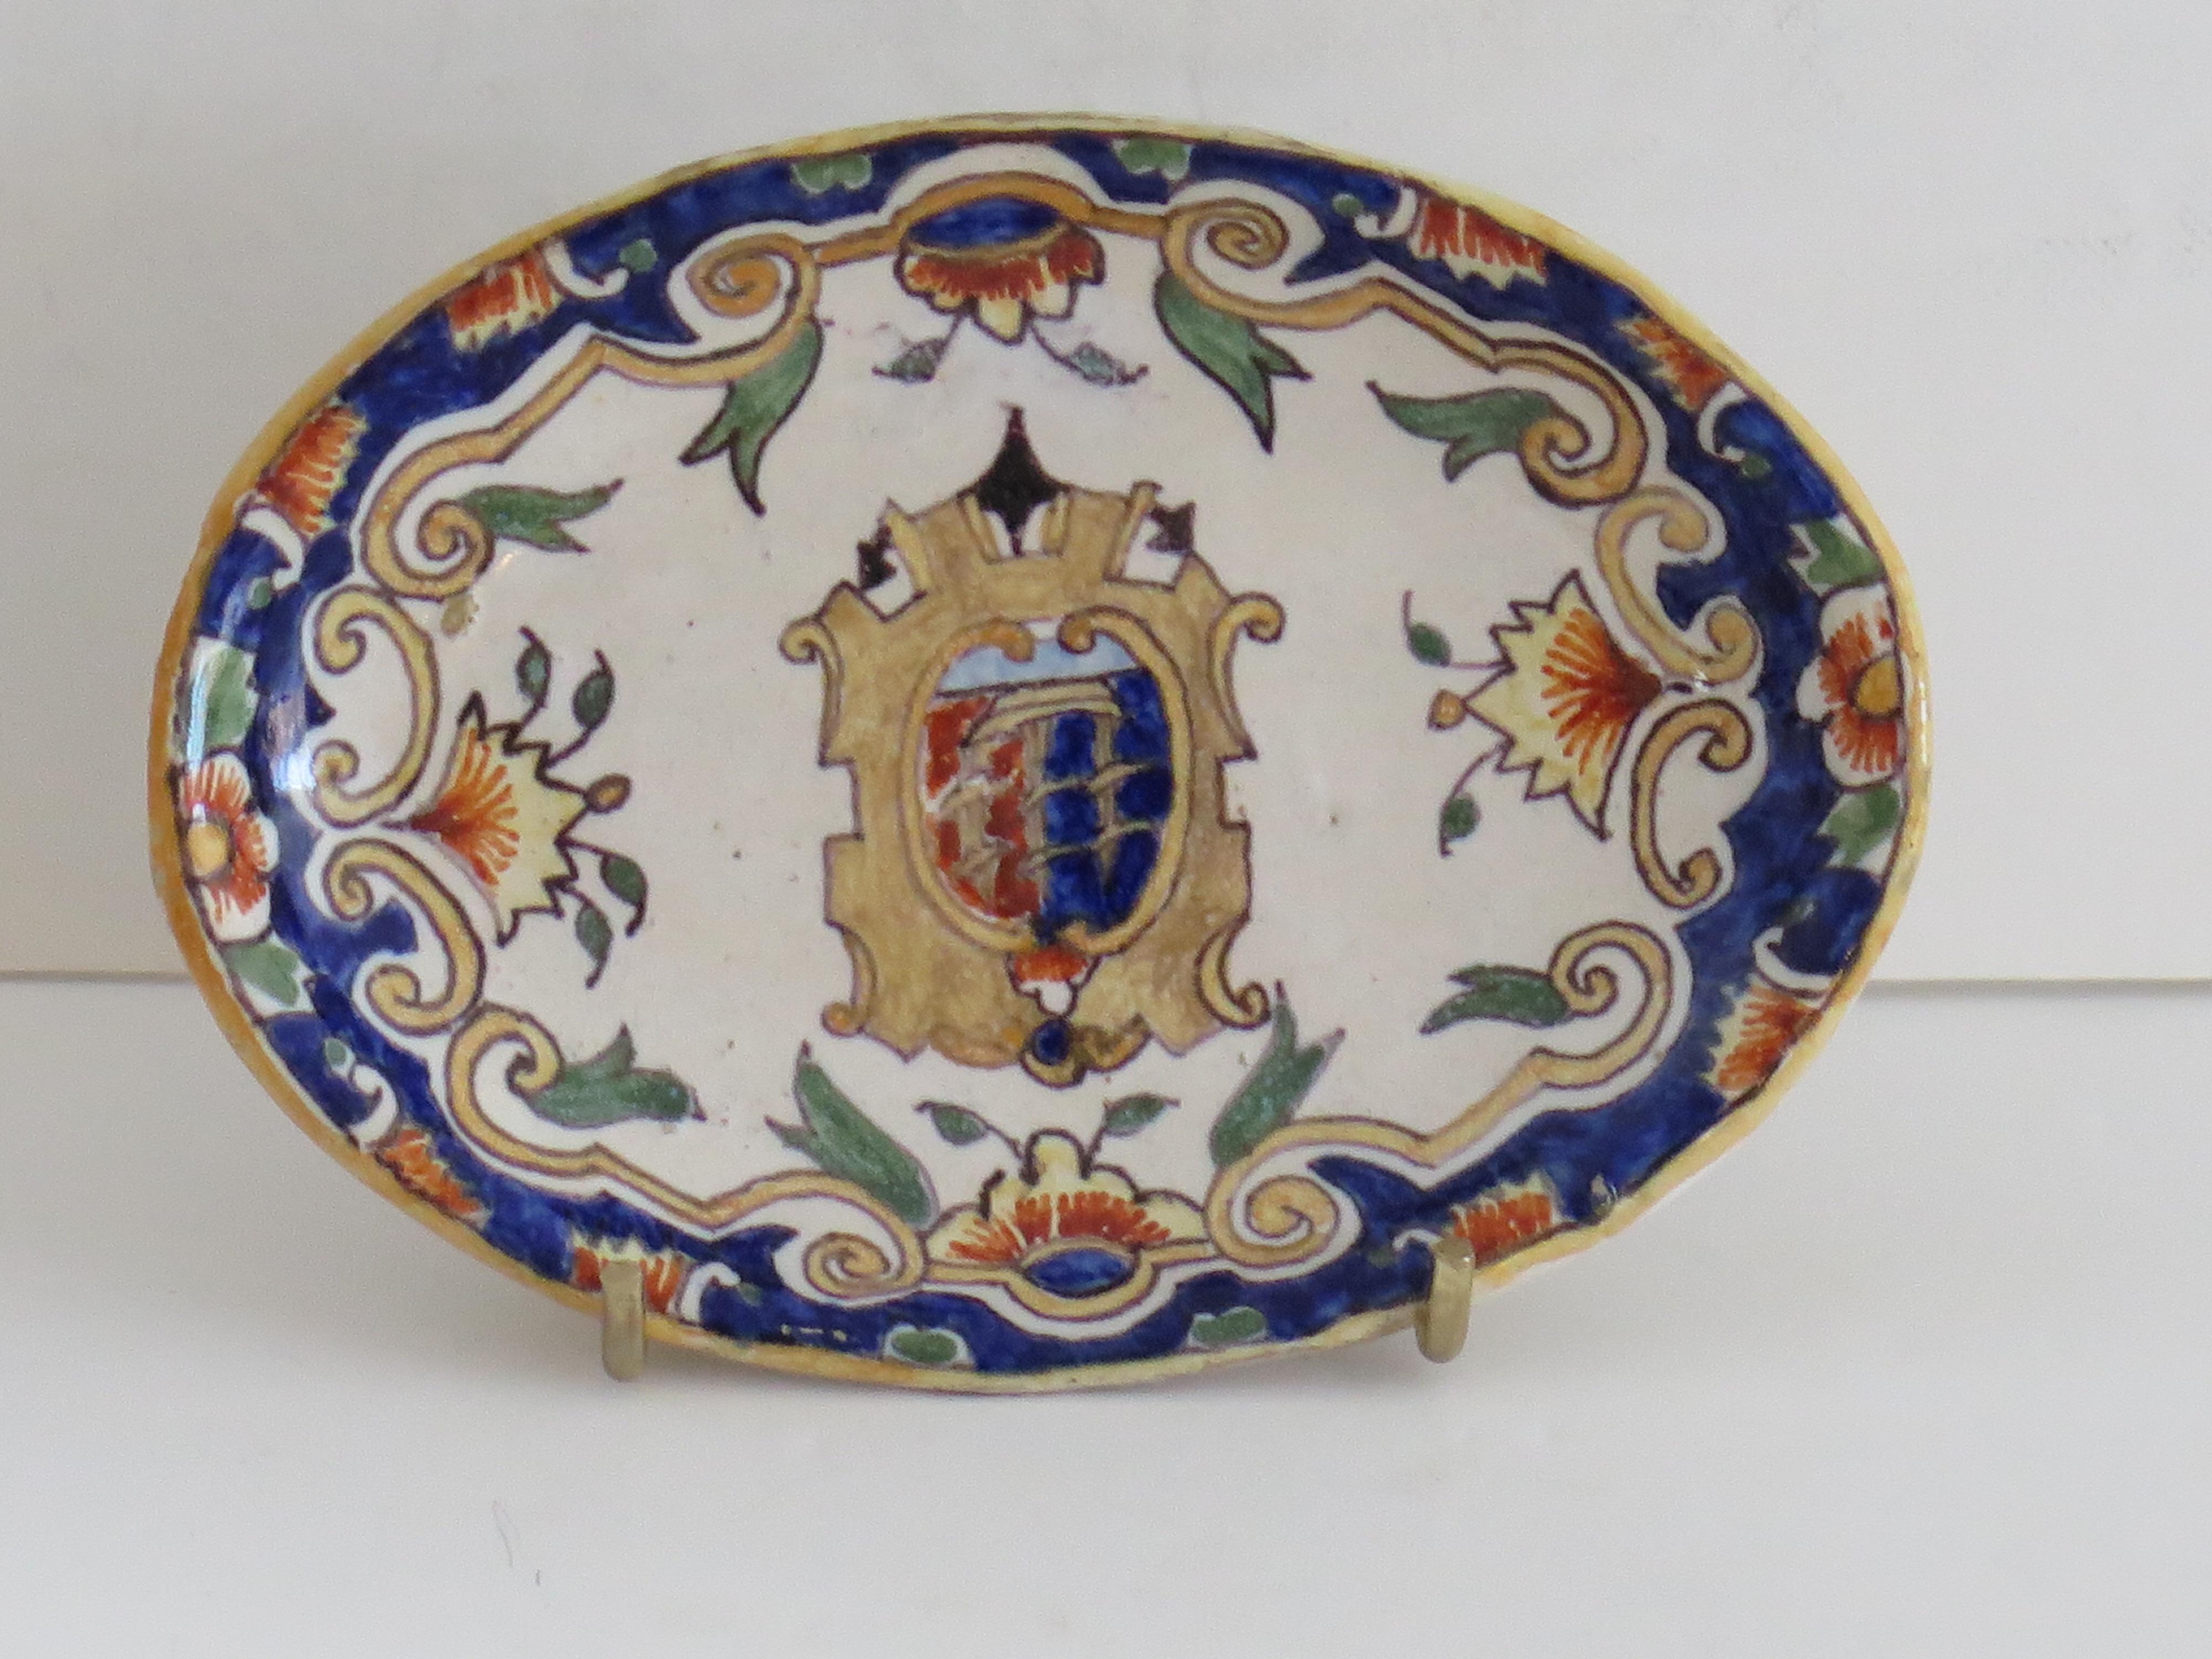 This is a very interesting Faience dish, made in Dieppe, Northern France during the second half of the 19th century.

The dish is fairly small with an oval shape and raised on a low foot.
It is all hand painted with an armorial scene.

It is